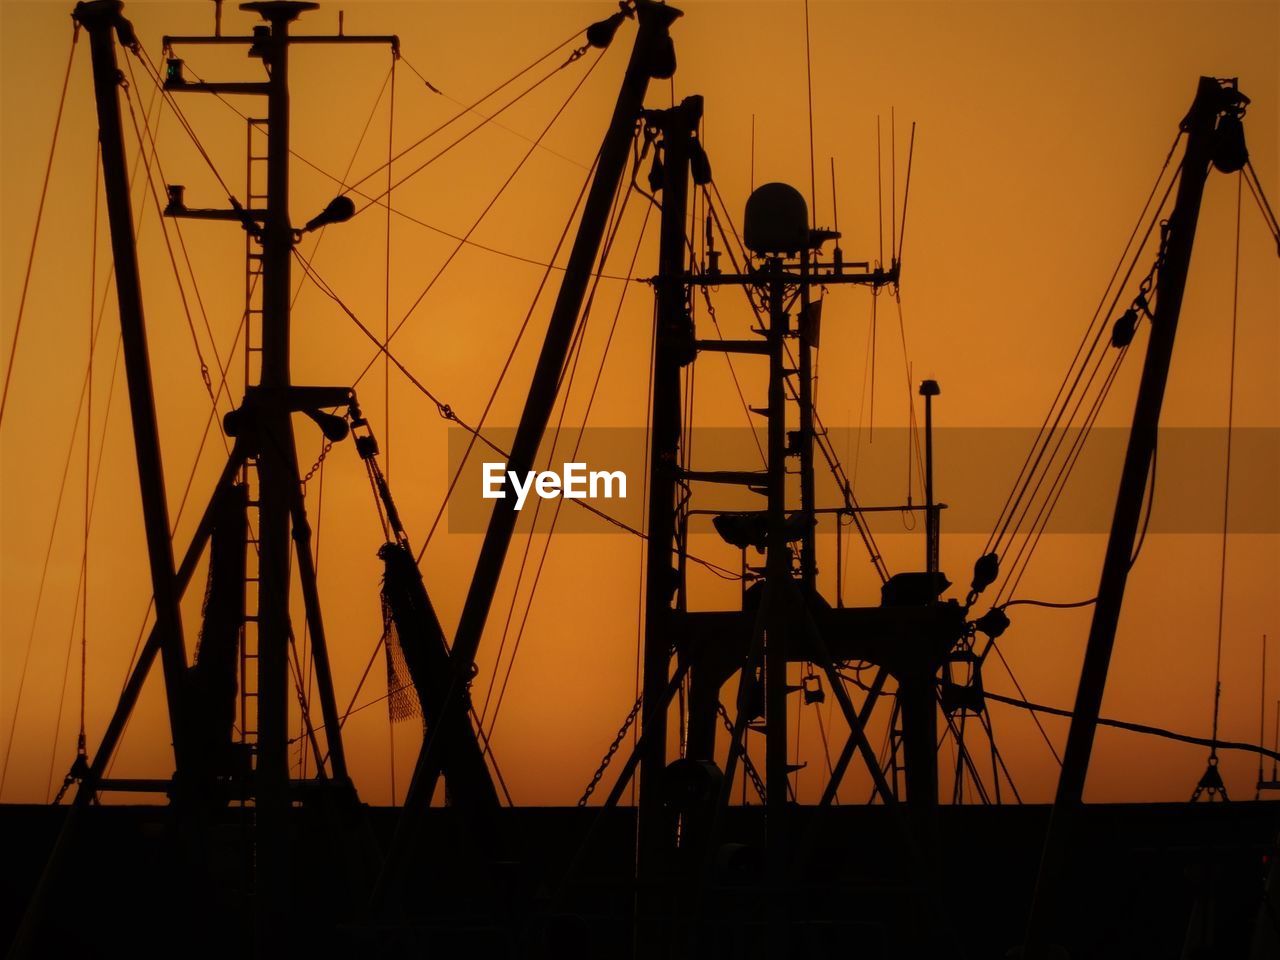 Ufishing trawlers against sky during sunset in büsum harbour